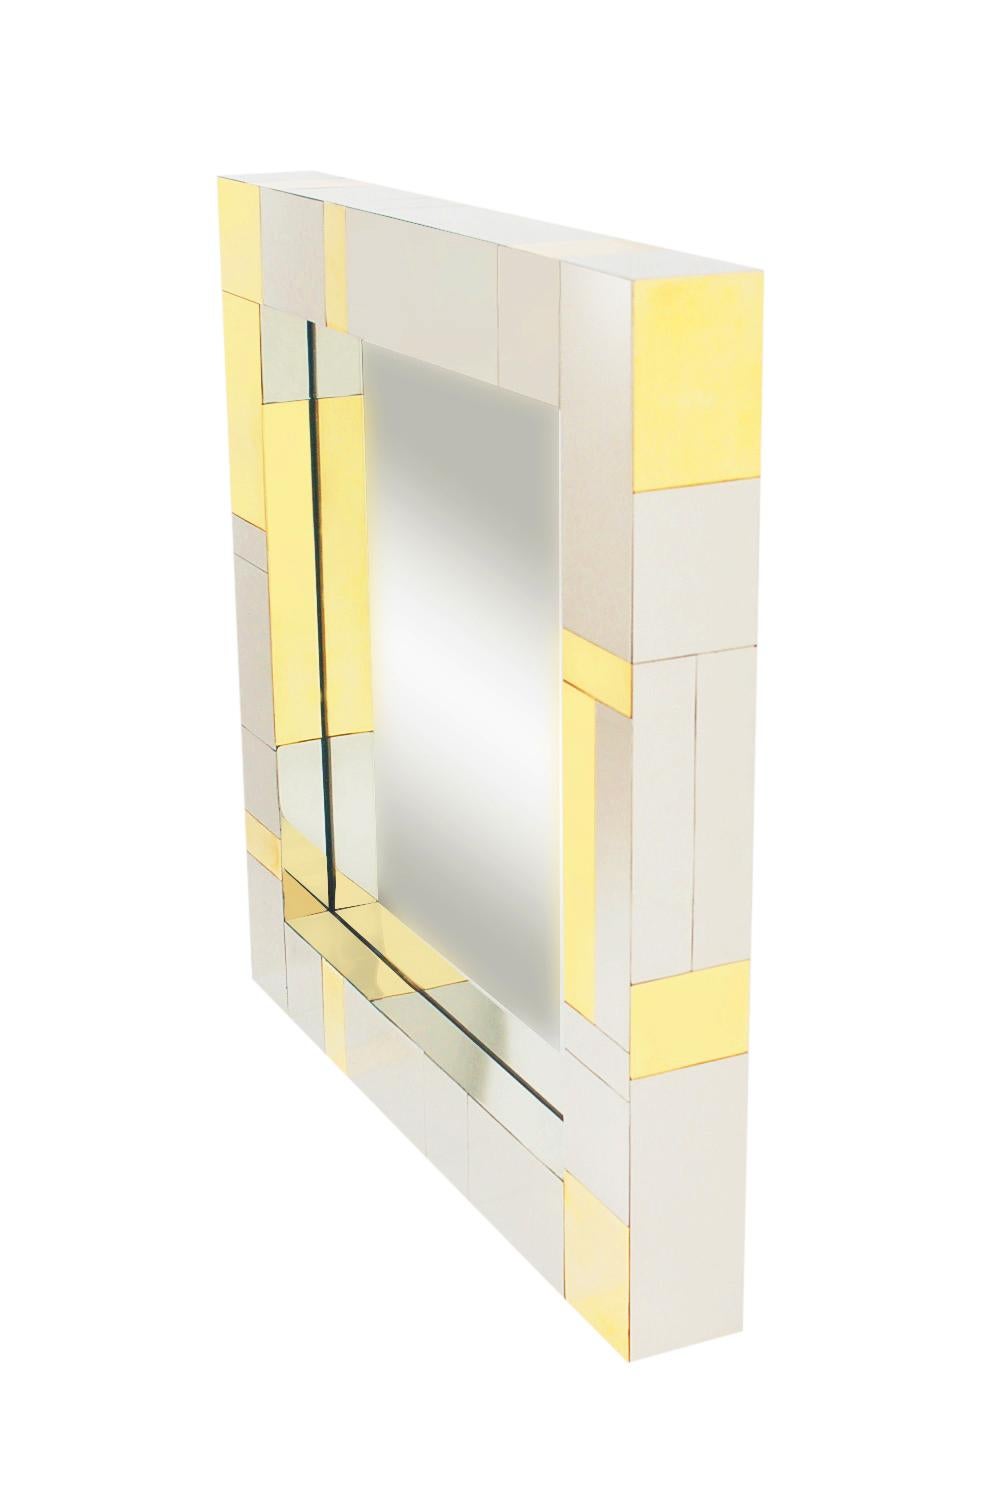 North American Chrome and Brass Midcentury Square Cityscape Mirrors in the Style of Paul Evans For Sale